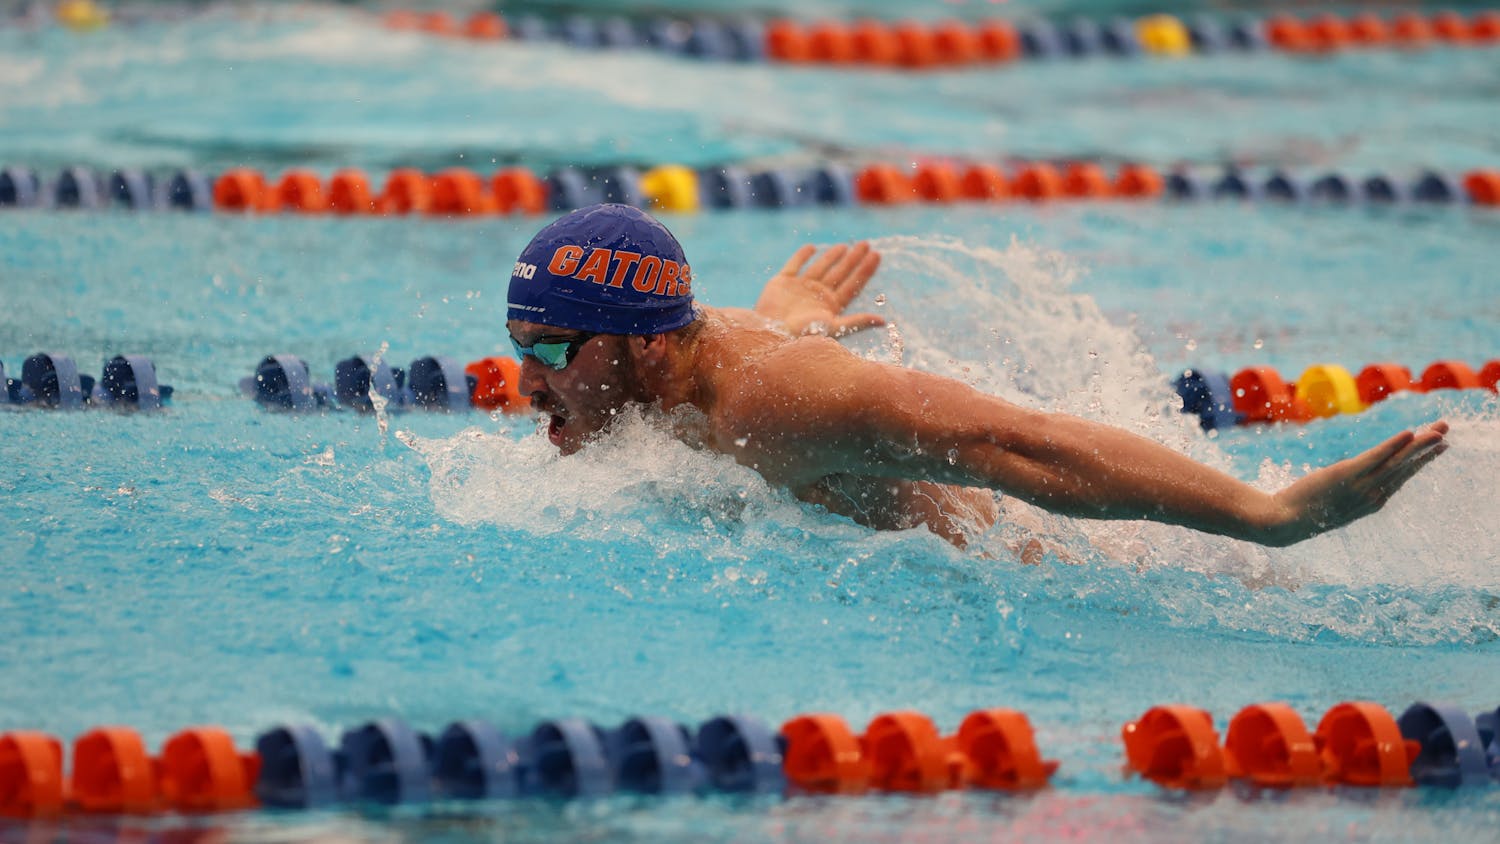  Senior Amro Al-Wir competes during the Gators' meet against the Virginia Cavaliers on Friday, October 13, 2023, at the Stephen C. O'Connell Center Natatorium in Gainesville, Florida.